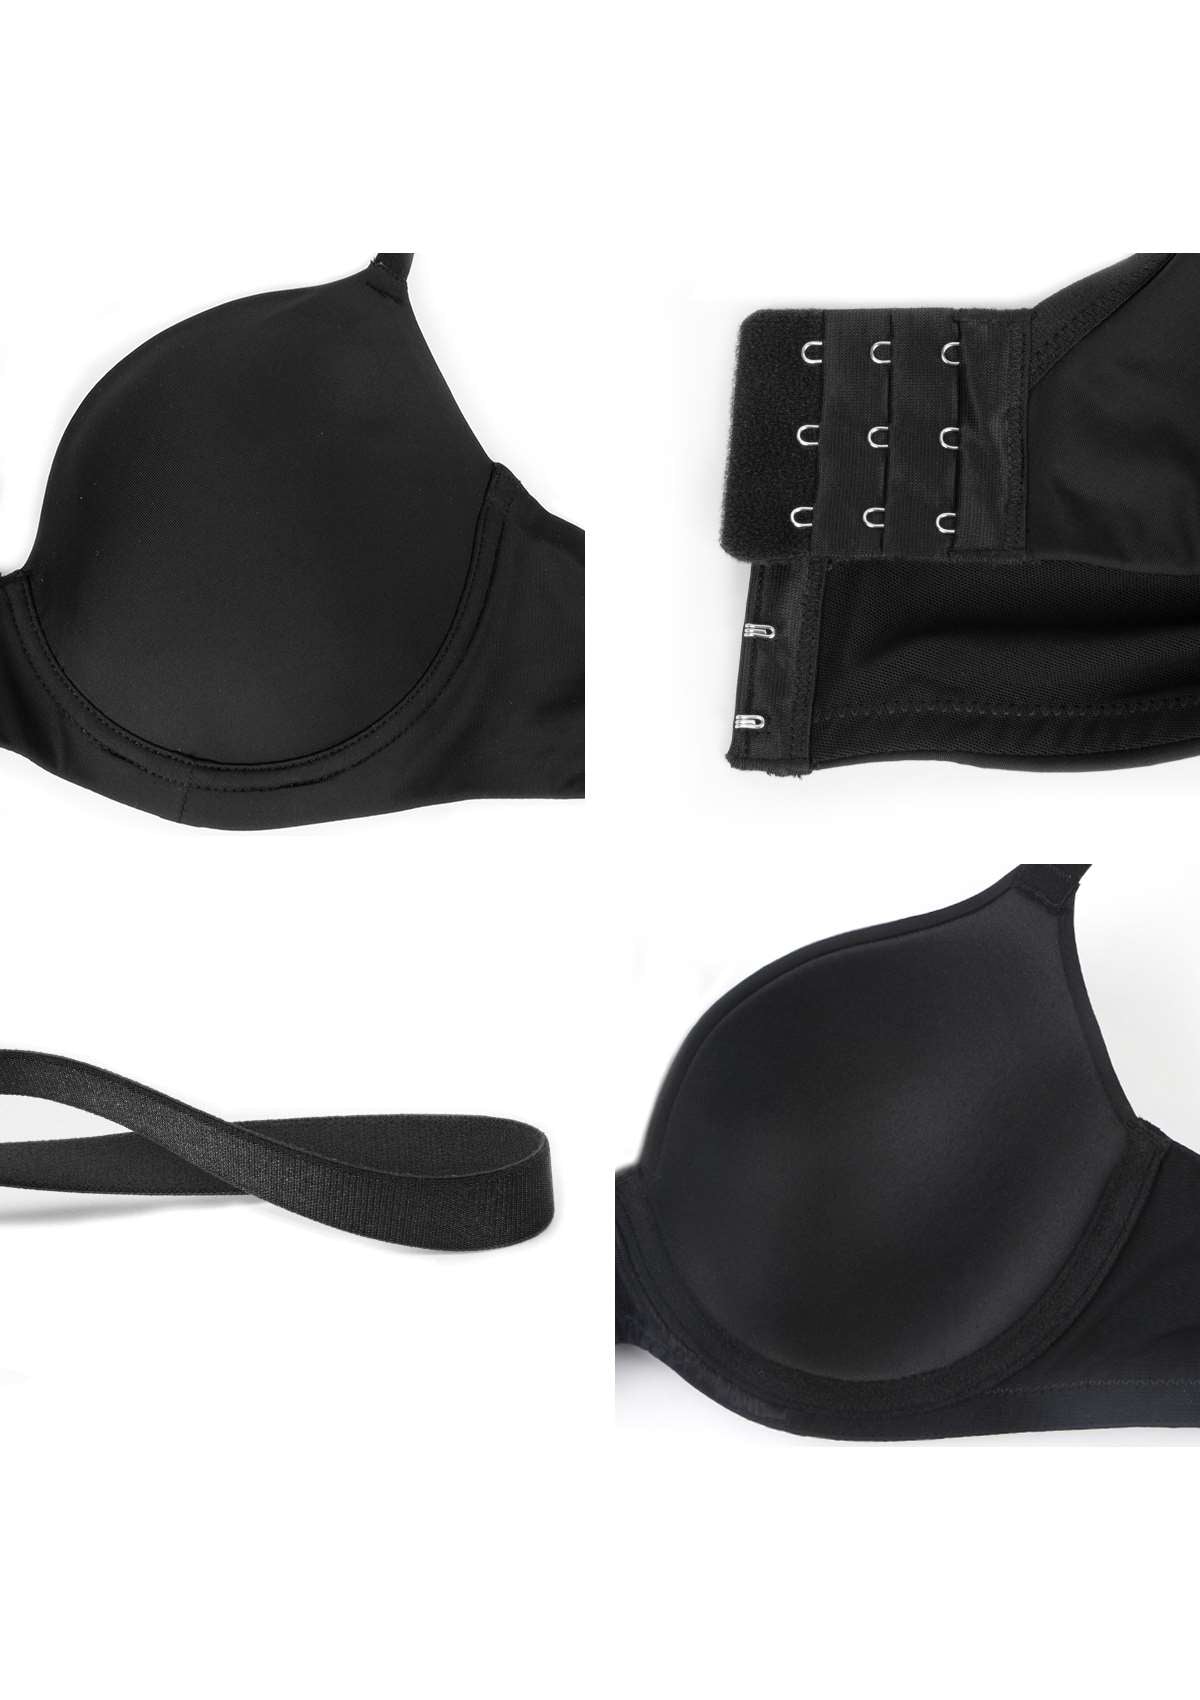 HSIA Gemma Smooth Padded T-shirt Everyday Bras - For Lift And Comfort - Black / 34 / D